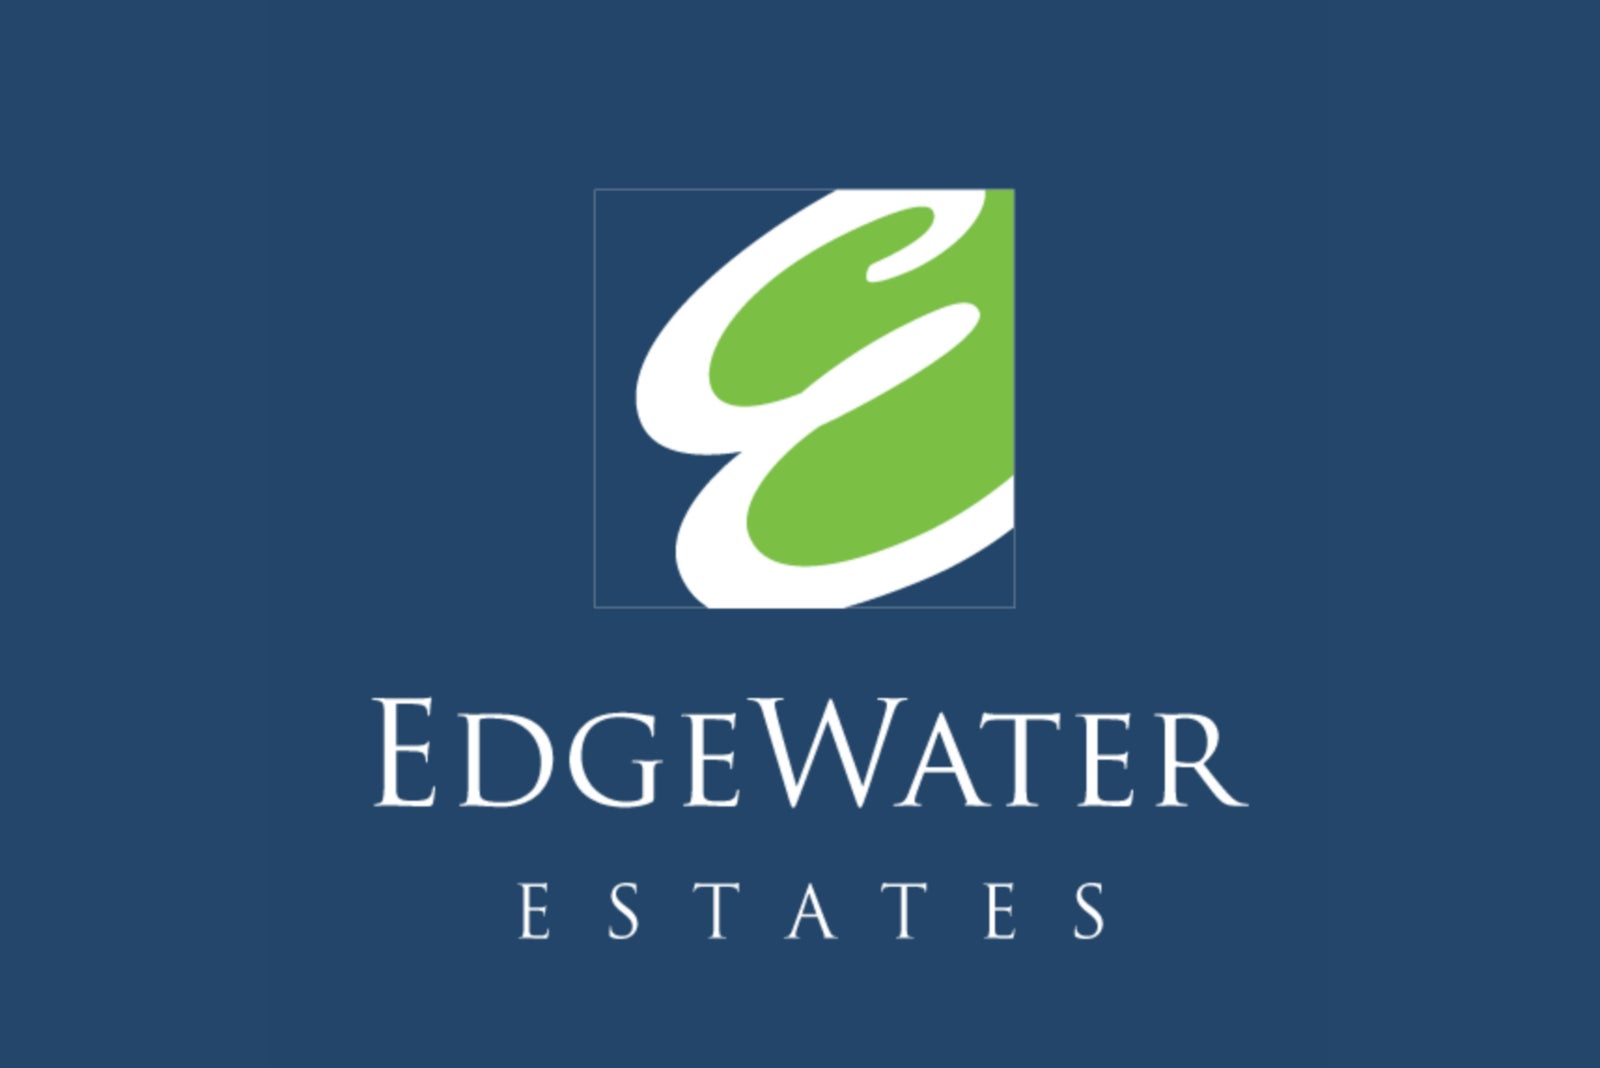 EdgeWater Estates in Kilworth, Ontario Radcliffe Team- sold out